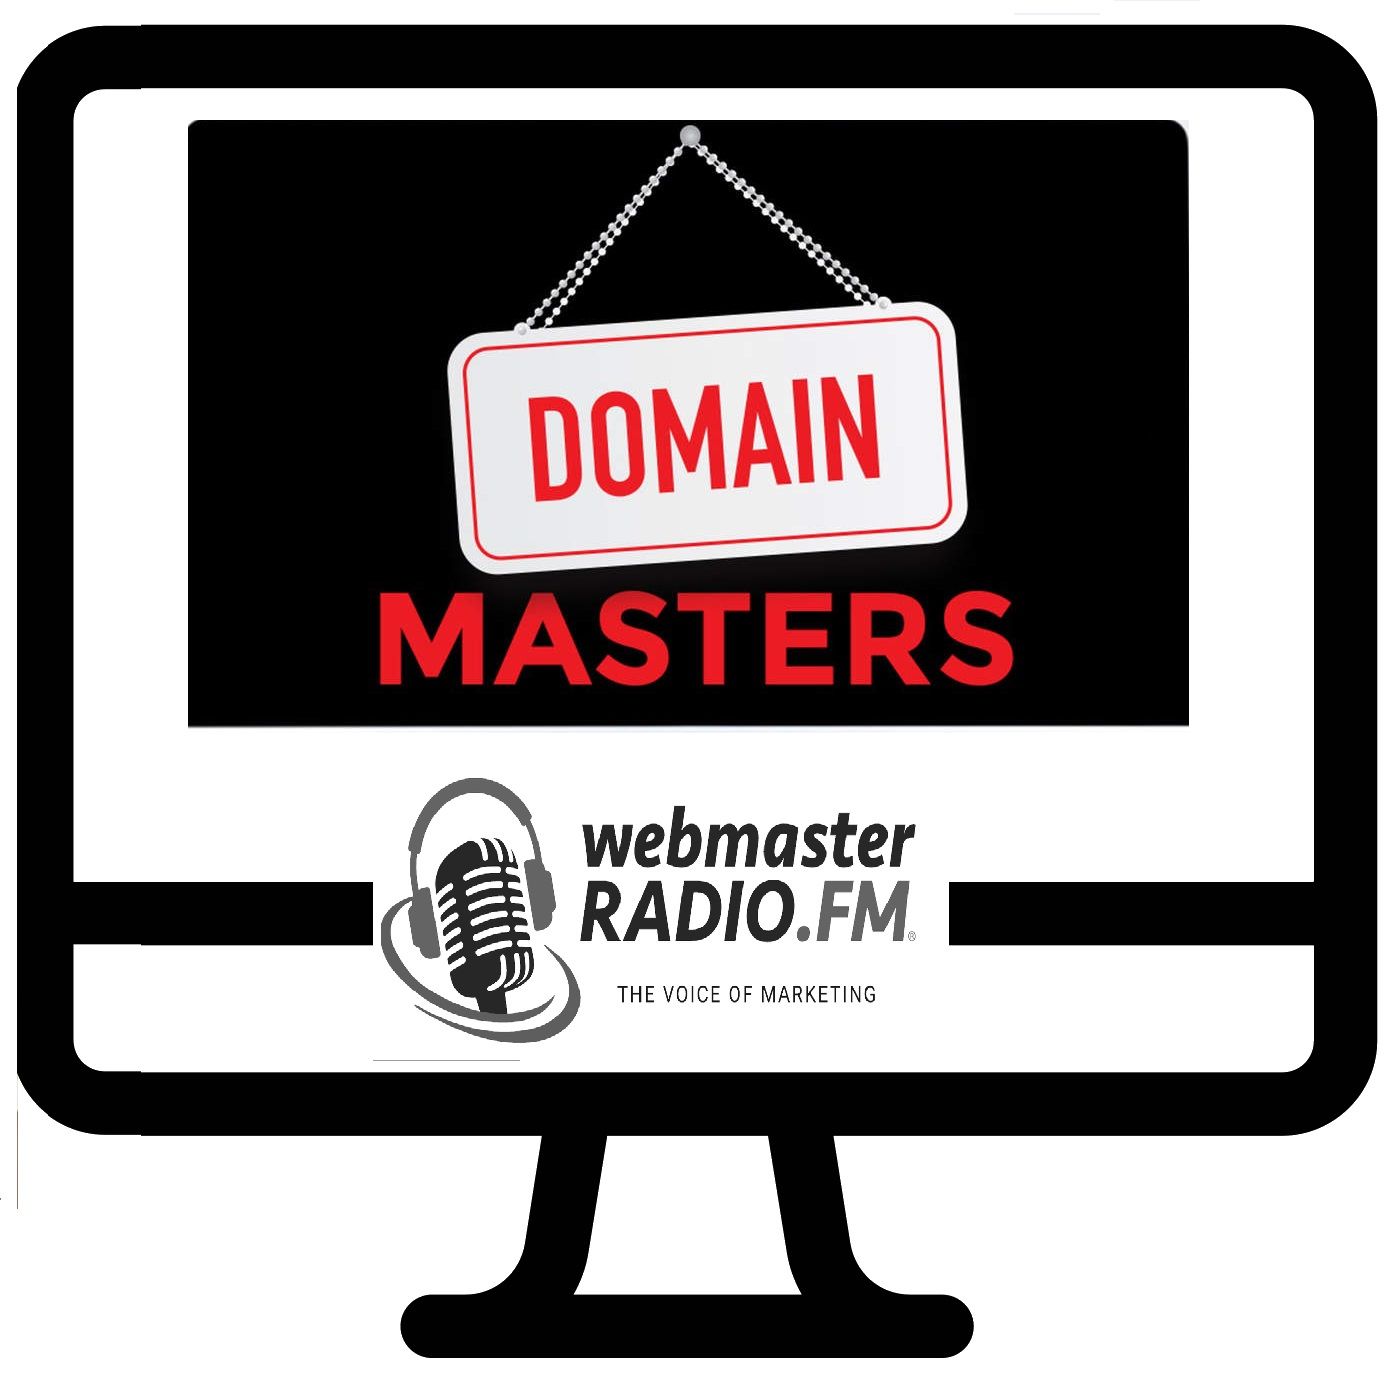 10 Tips to Domainers for Buying High Traffic Domains While Protecting Your Existing Traffic; Chronicling the dotCO Launch